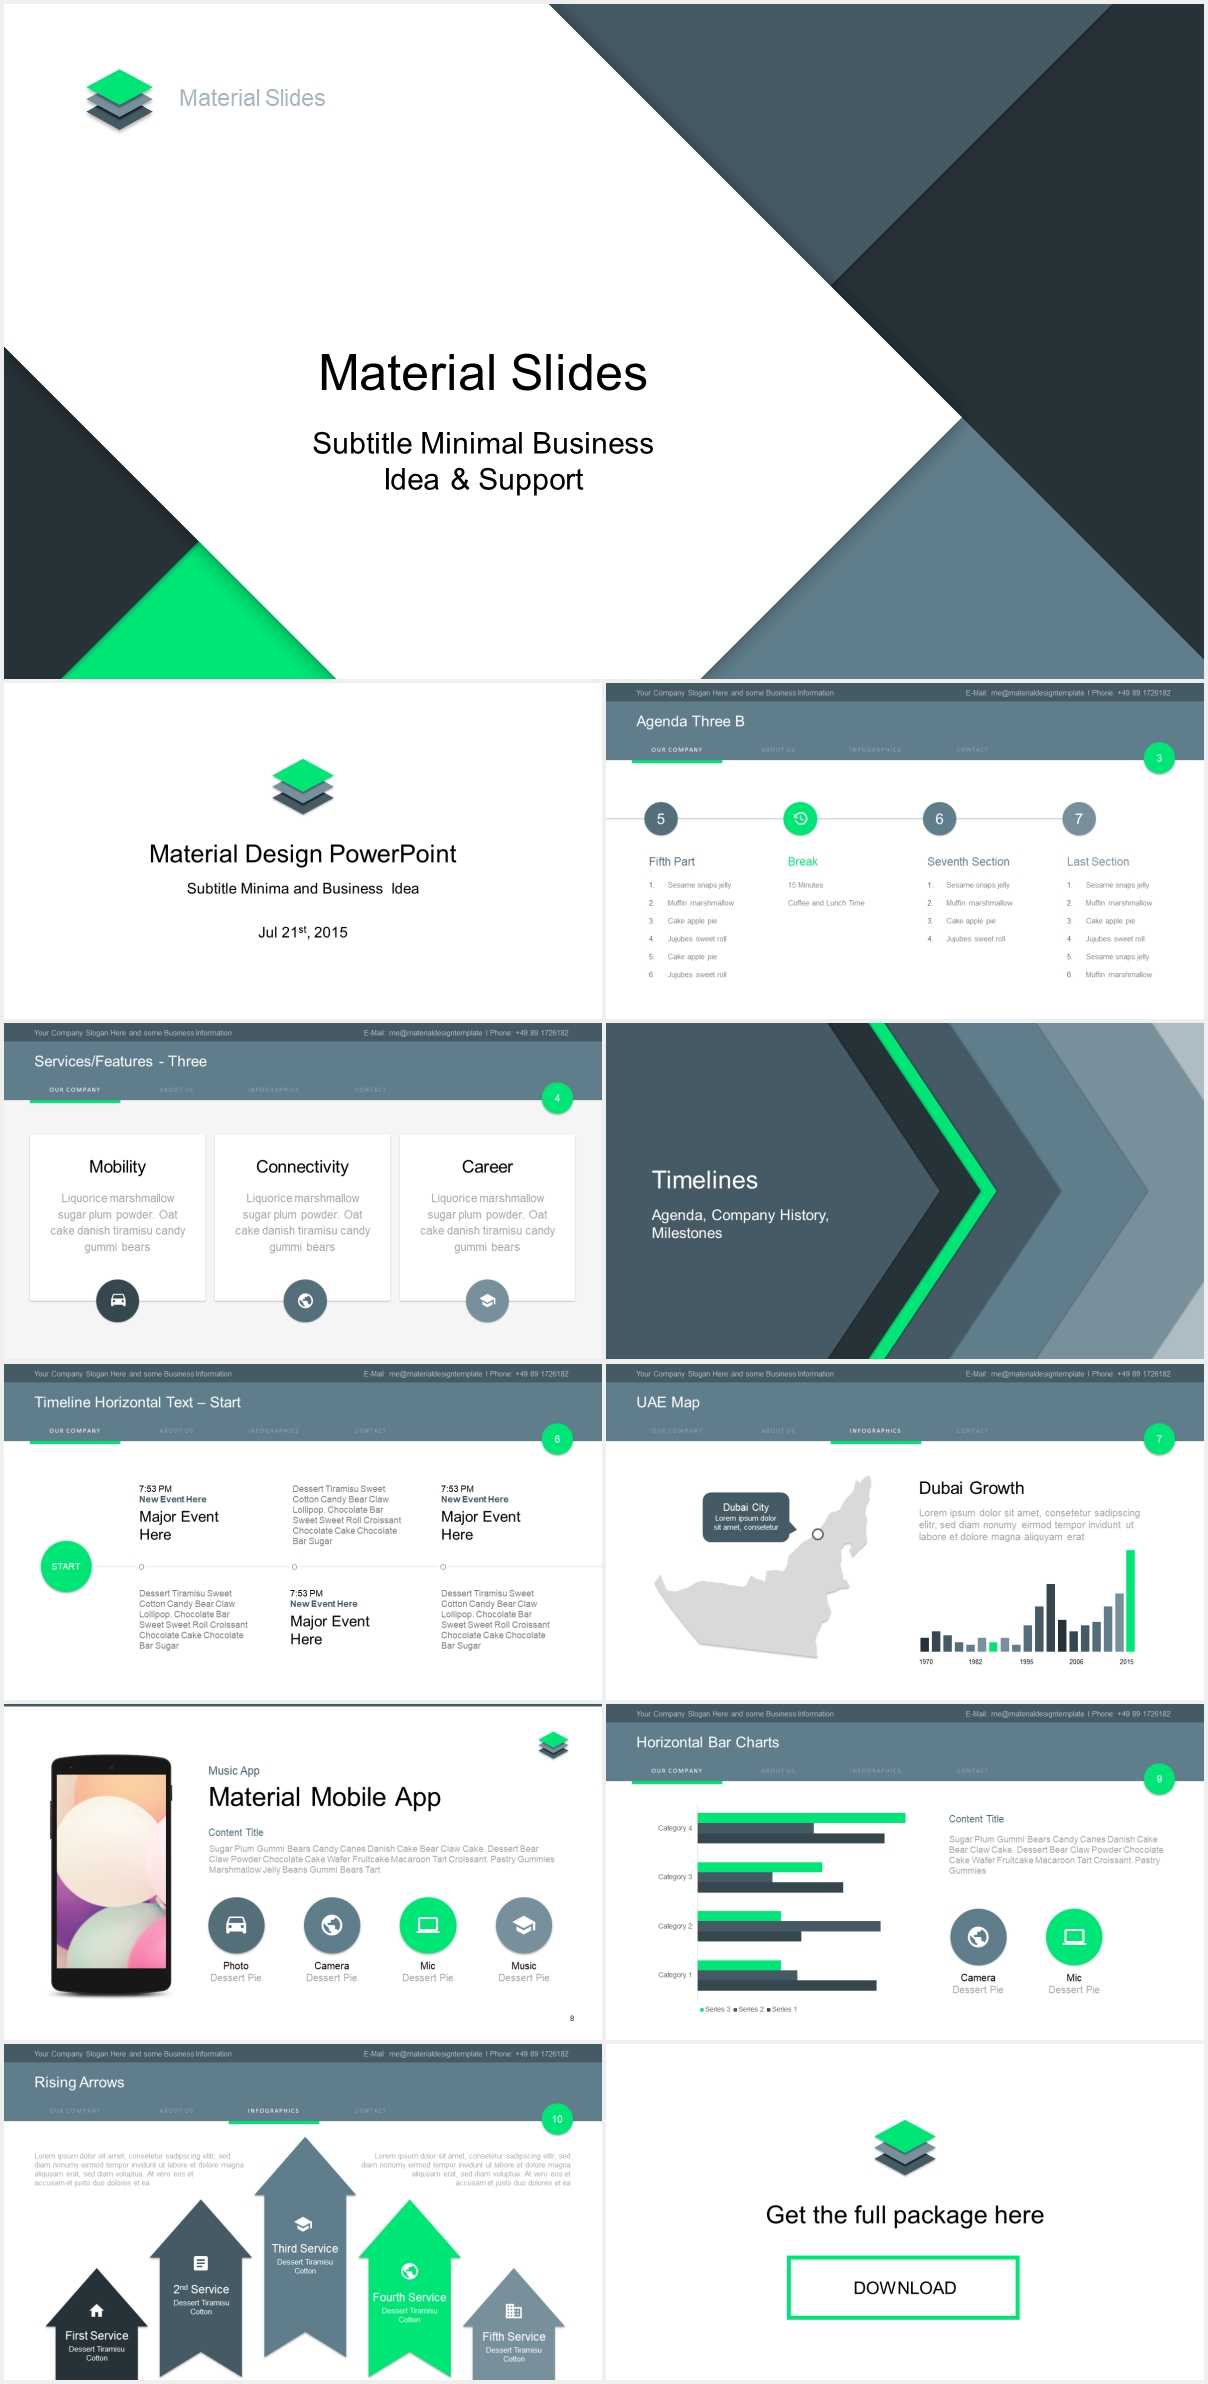 Material Design Powerpoint Template – Just Free Slides With Regard To How To Design A Powerpoint Template